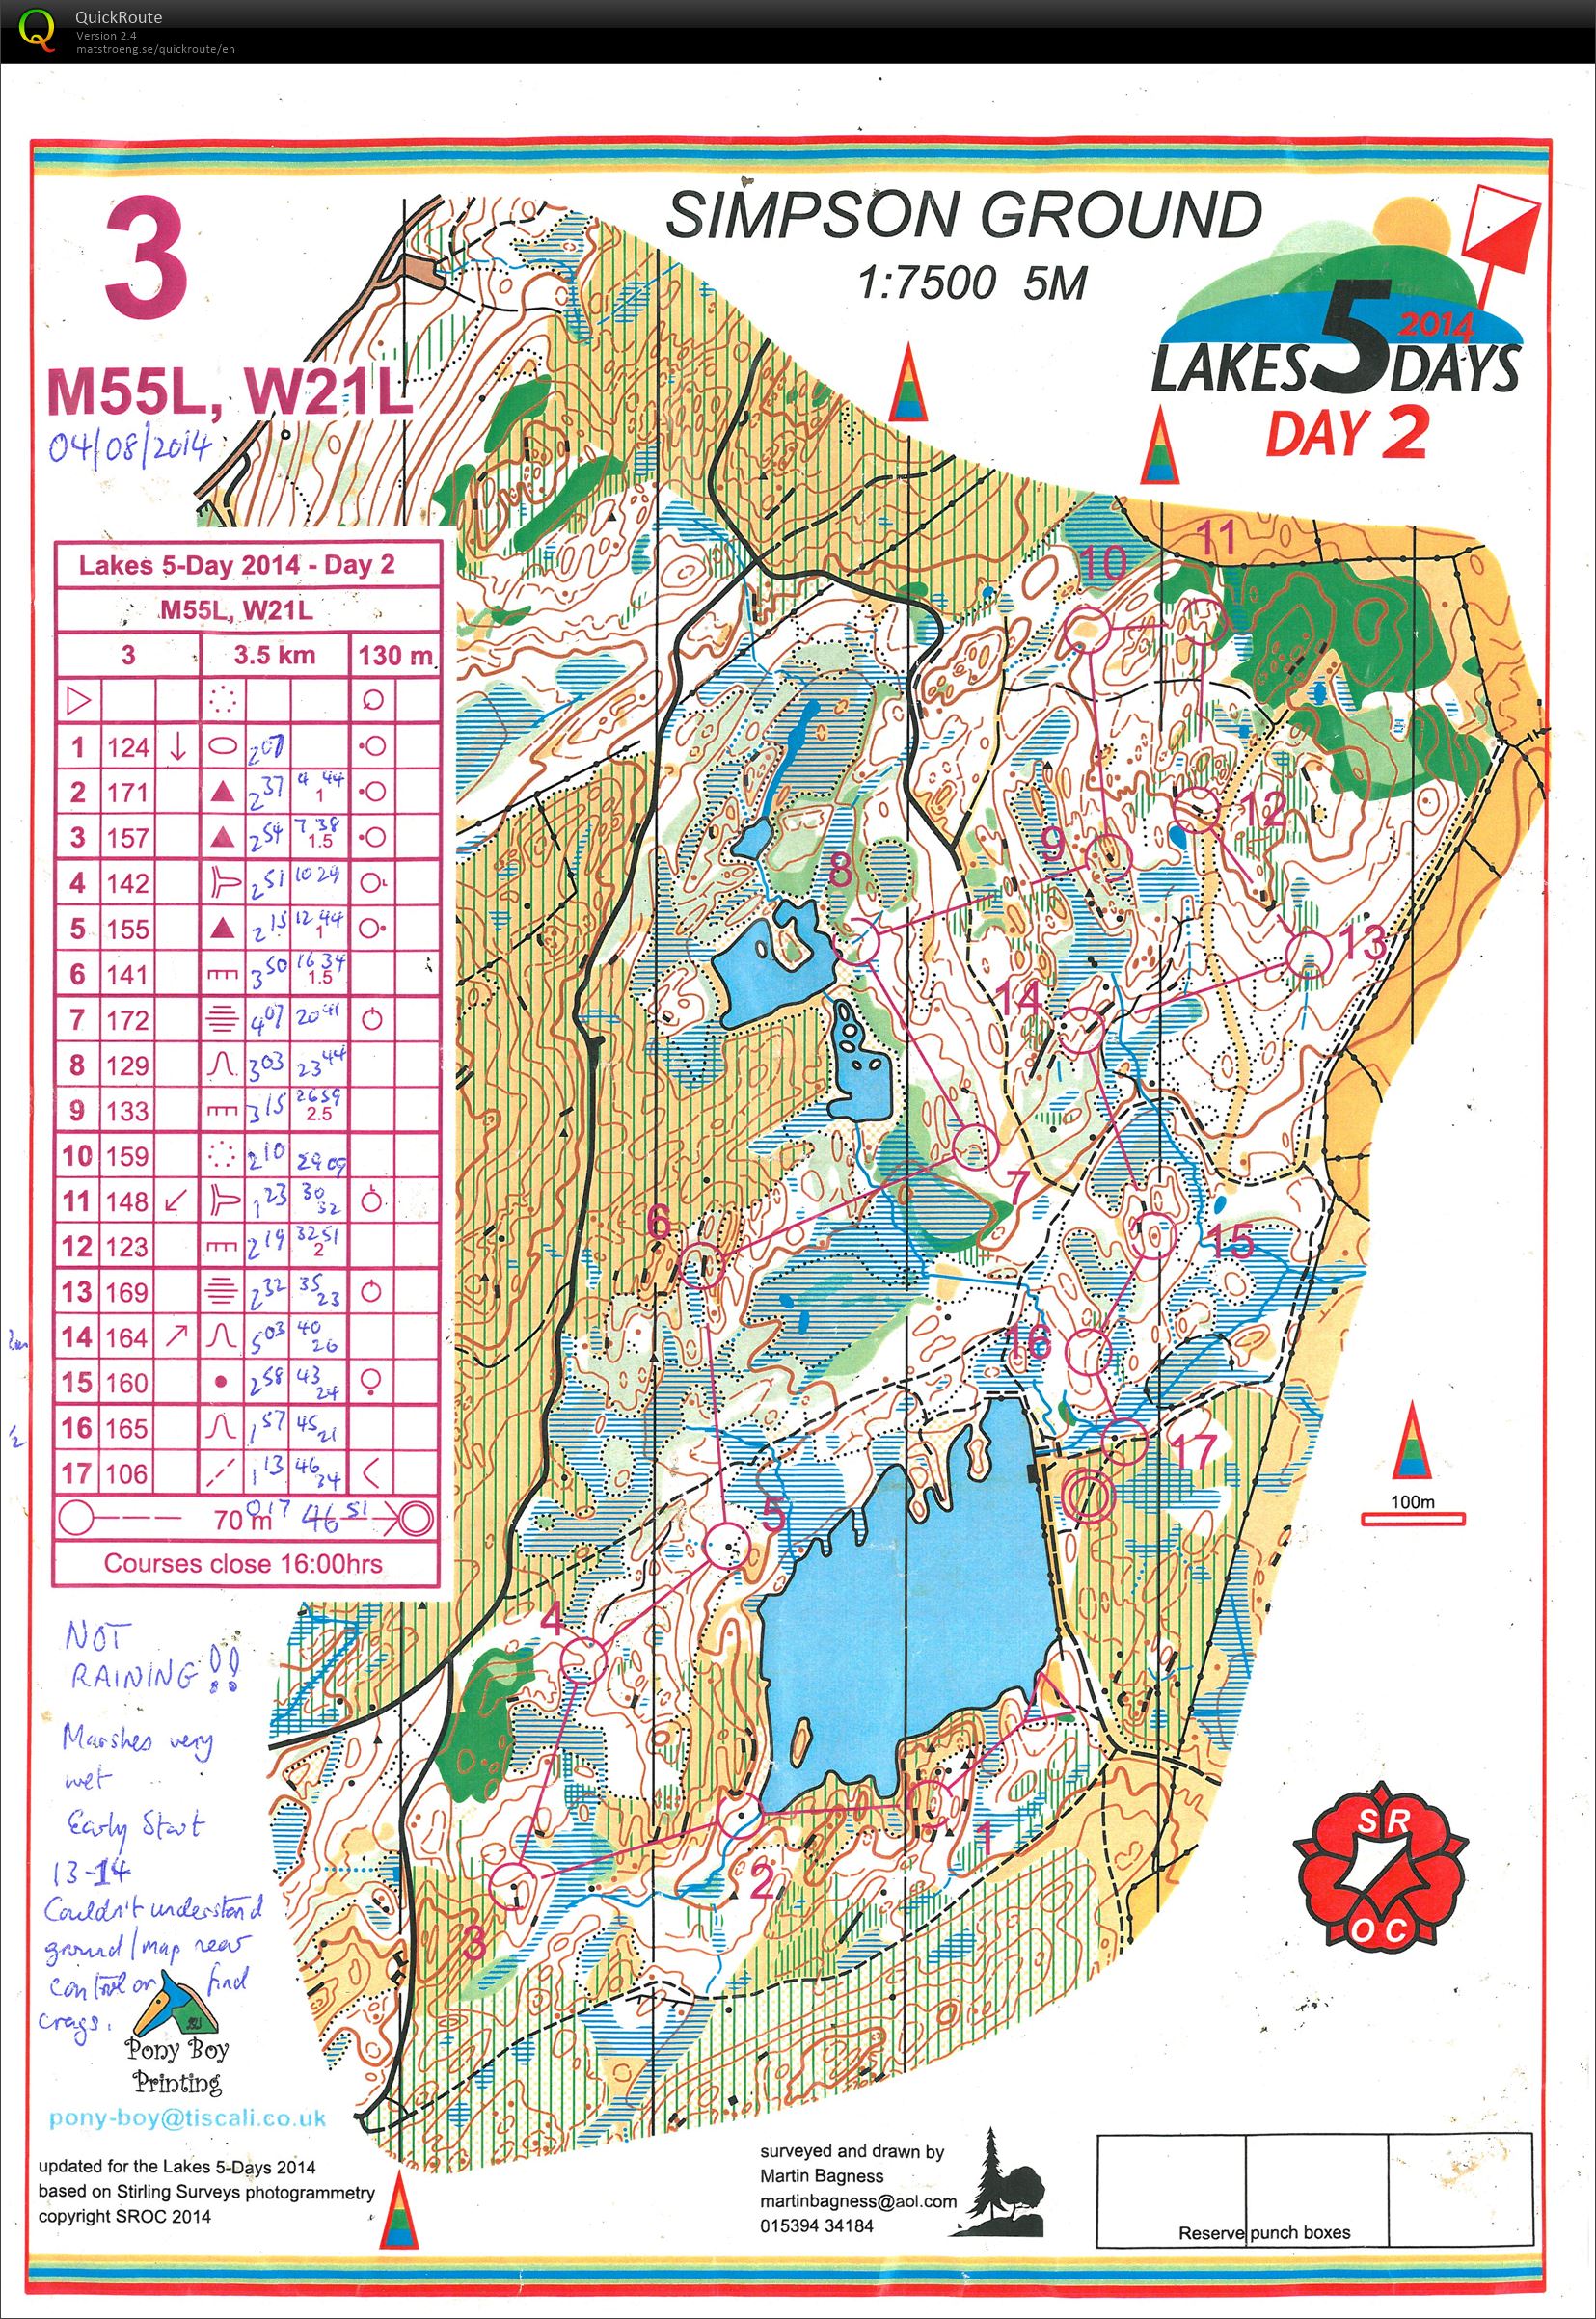 Lakes 5 days - Day 2 H55 (04.08.2014)